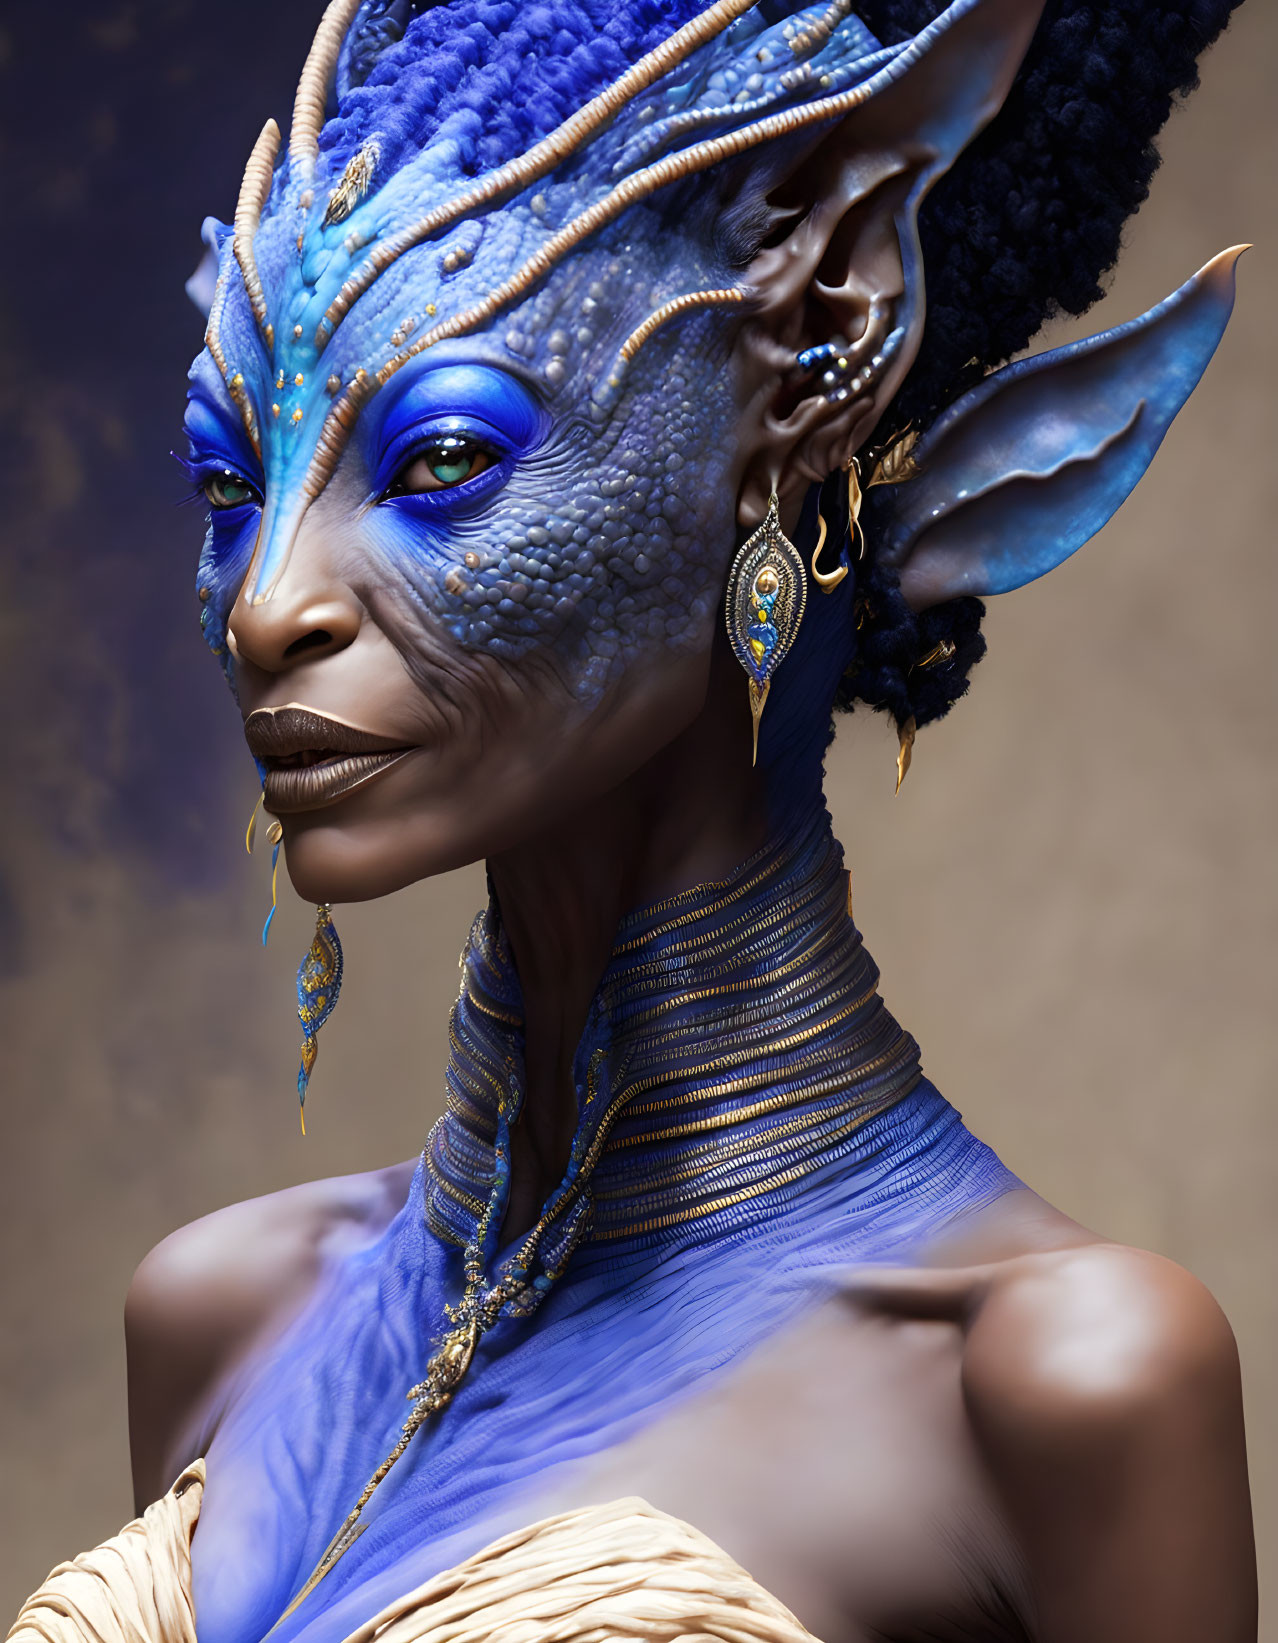 Blue-skinned figure with pointed ears and golden jewelry in intricate textures.